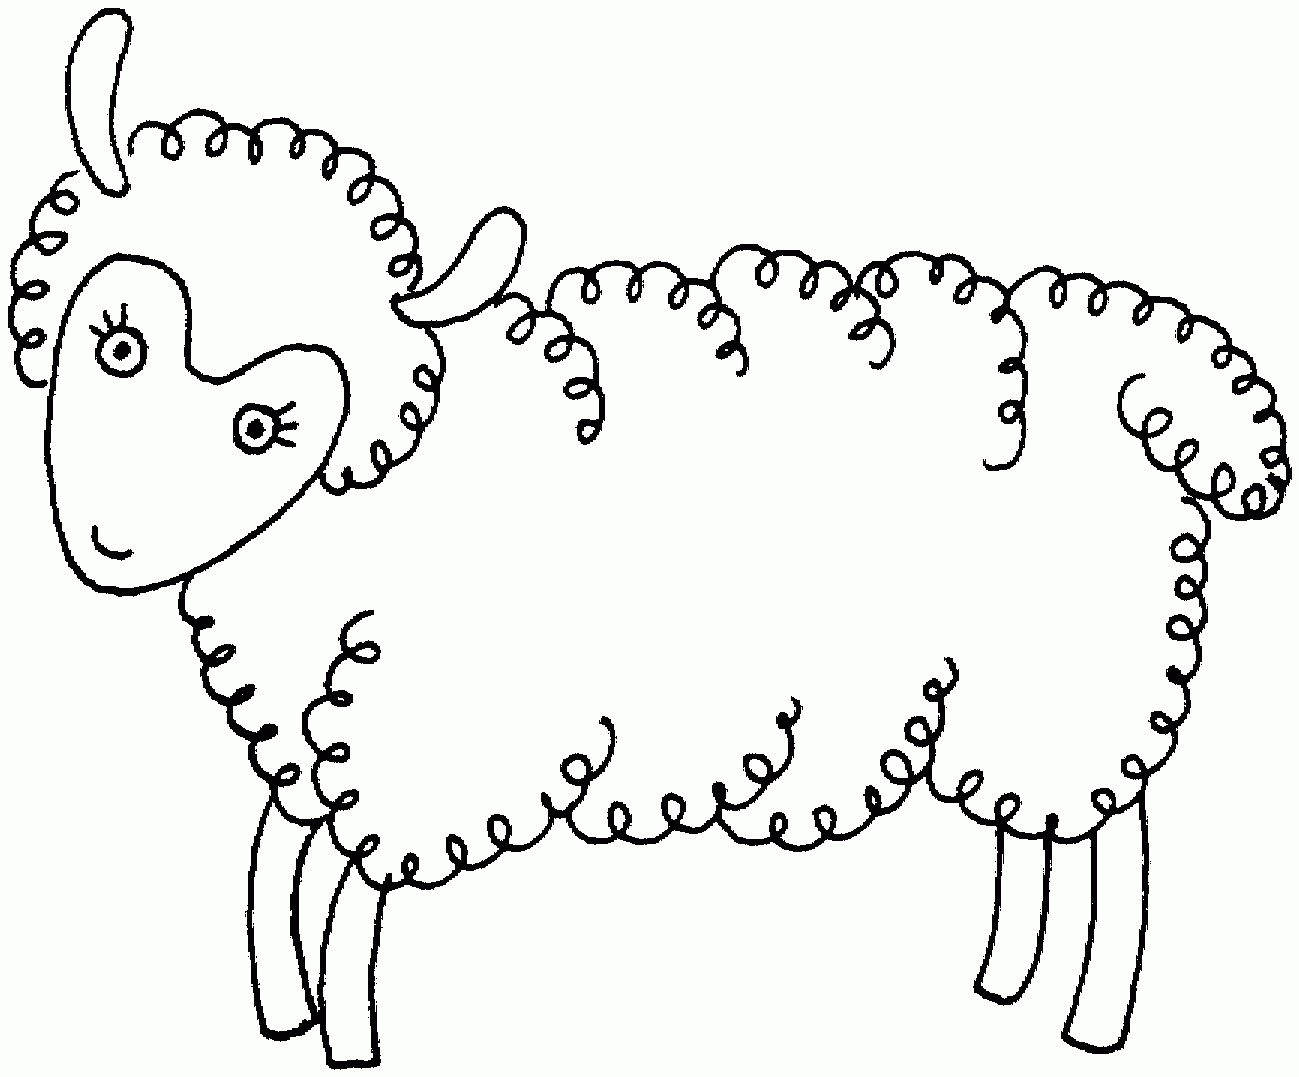 Science Free Coloring Pages Of Suzy Sheep - Widetheme